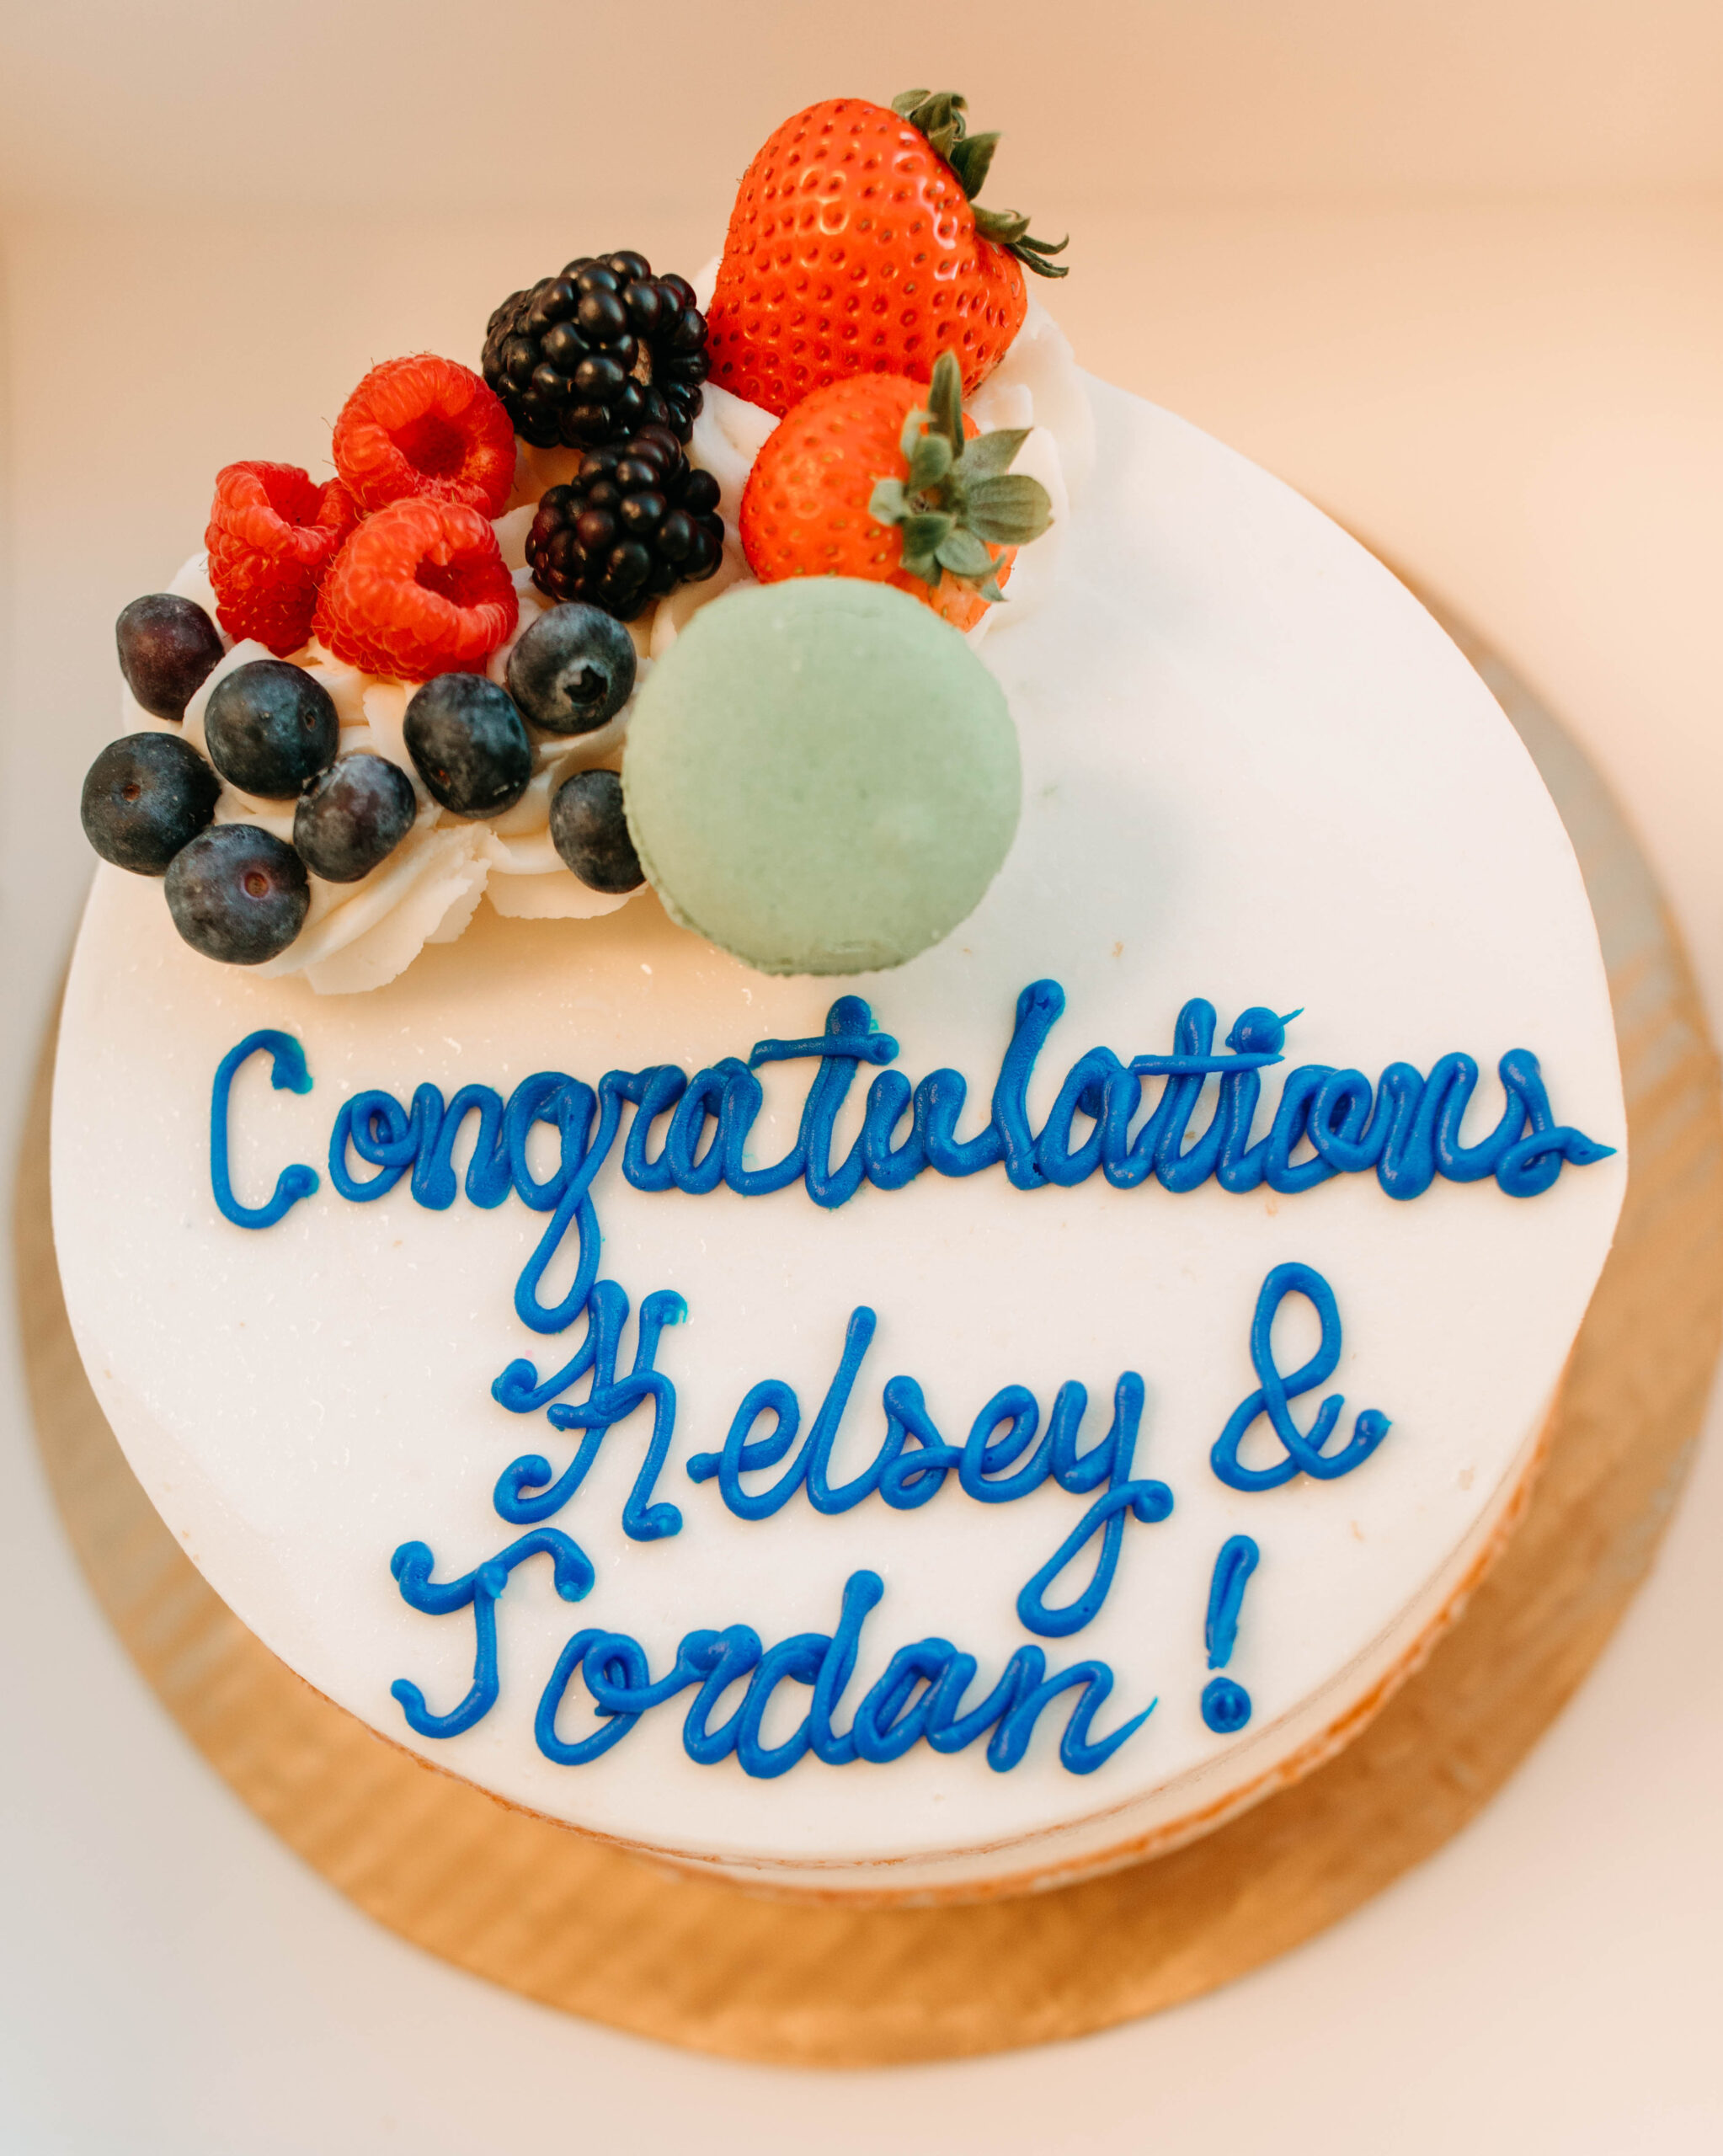 A cake for a couple who just got Engaged in Austin Texas that reads "Congratulations Kelsey and Jordan!"